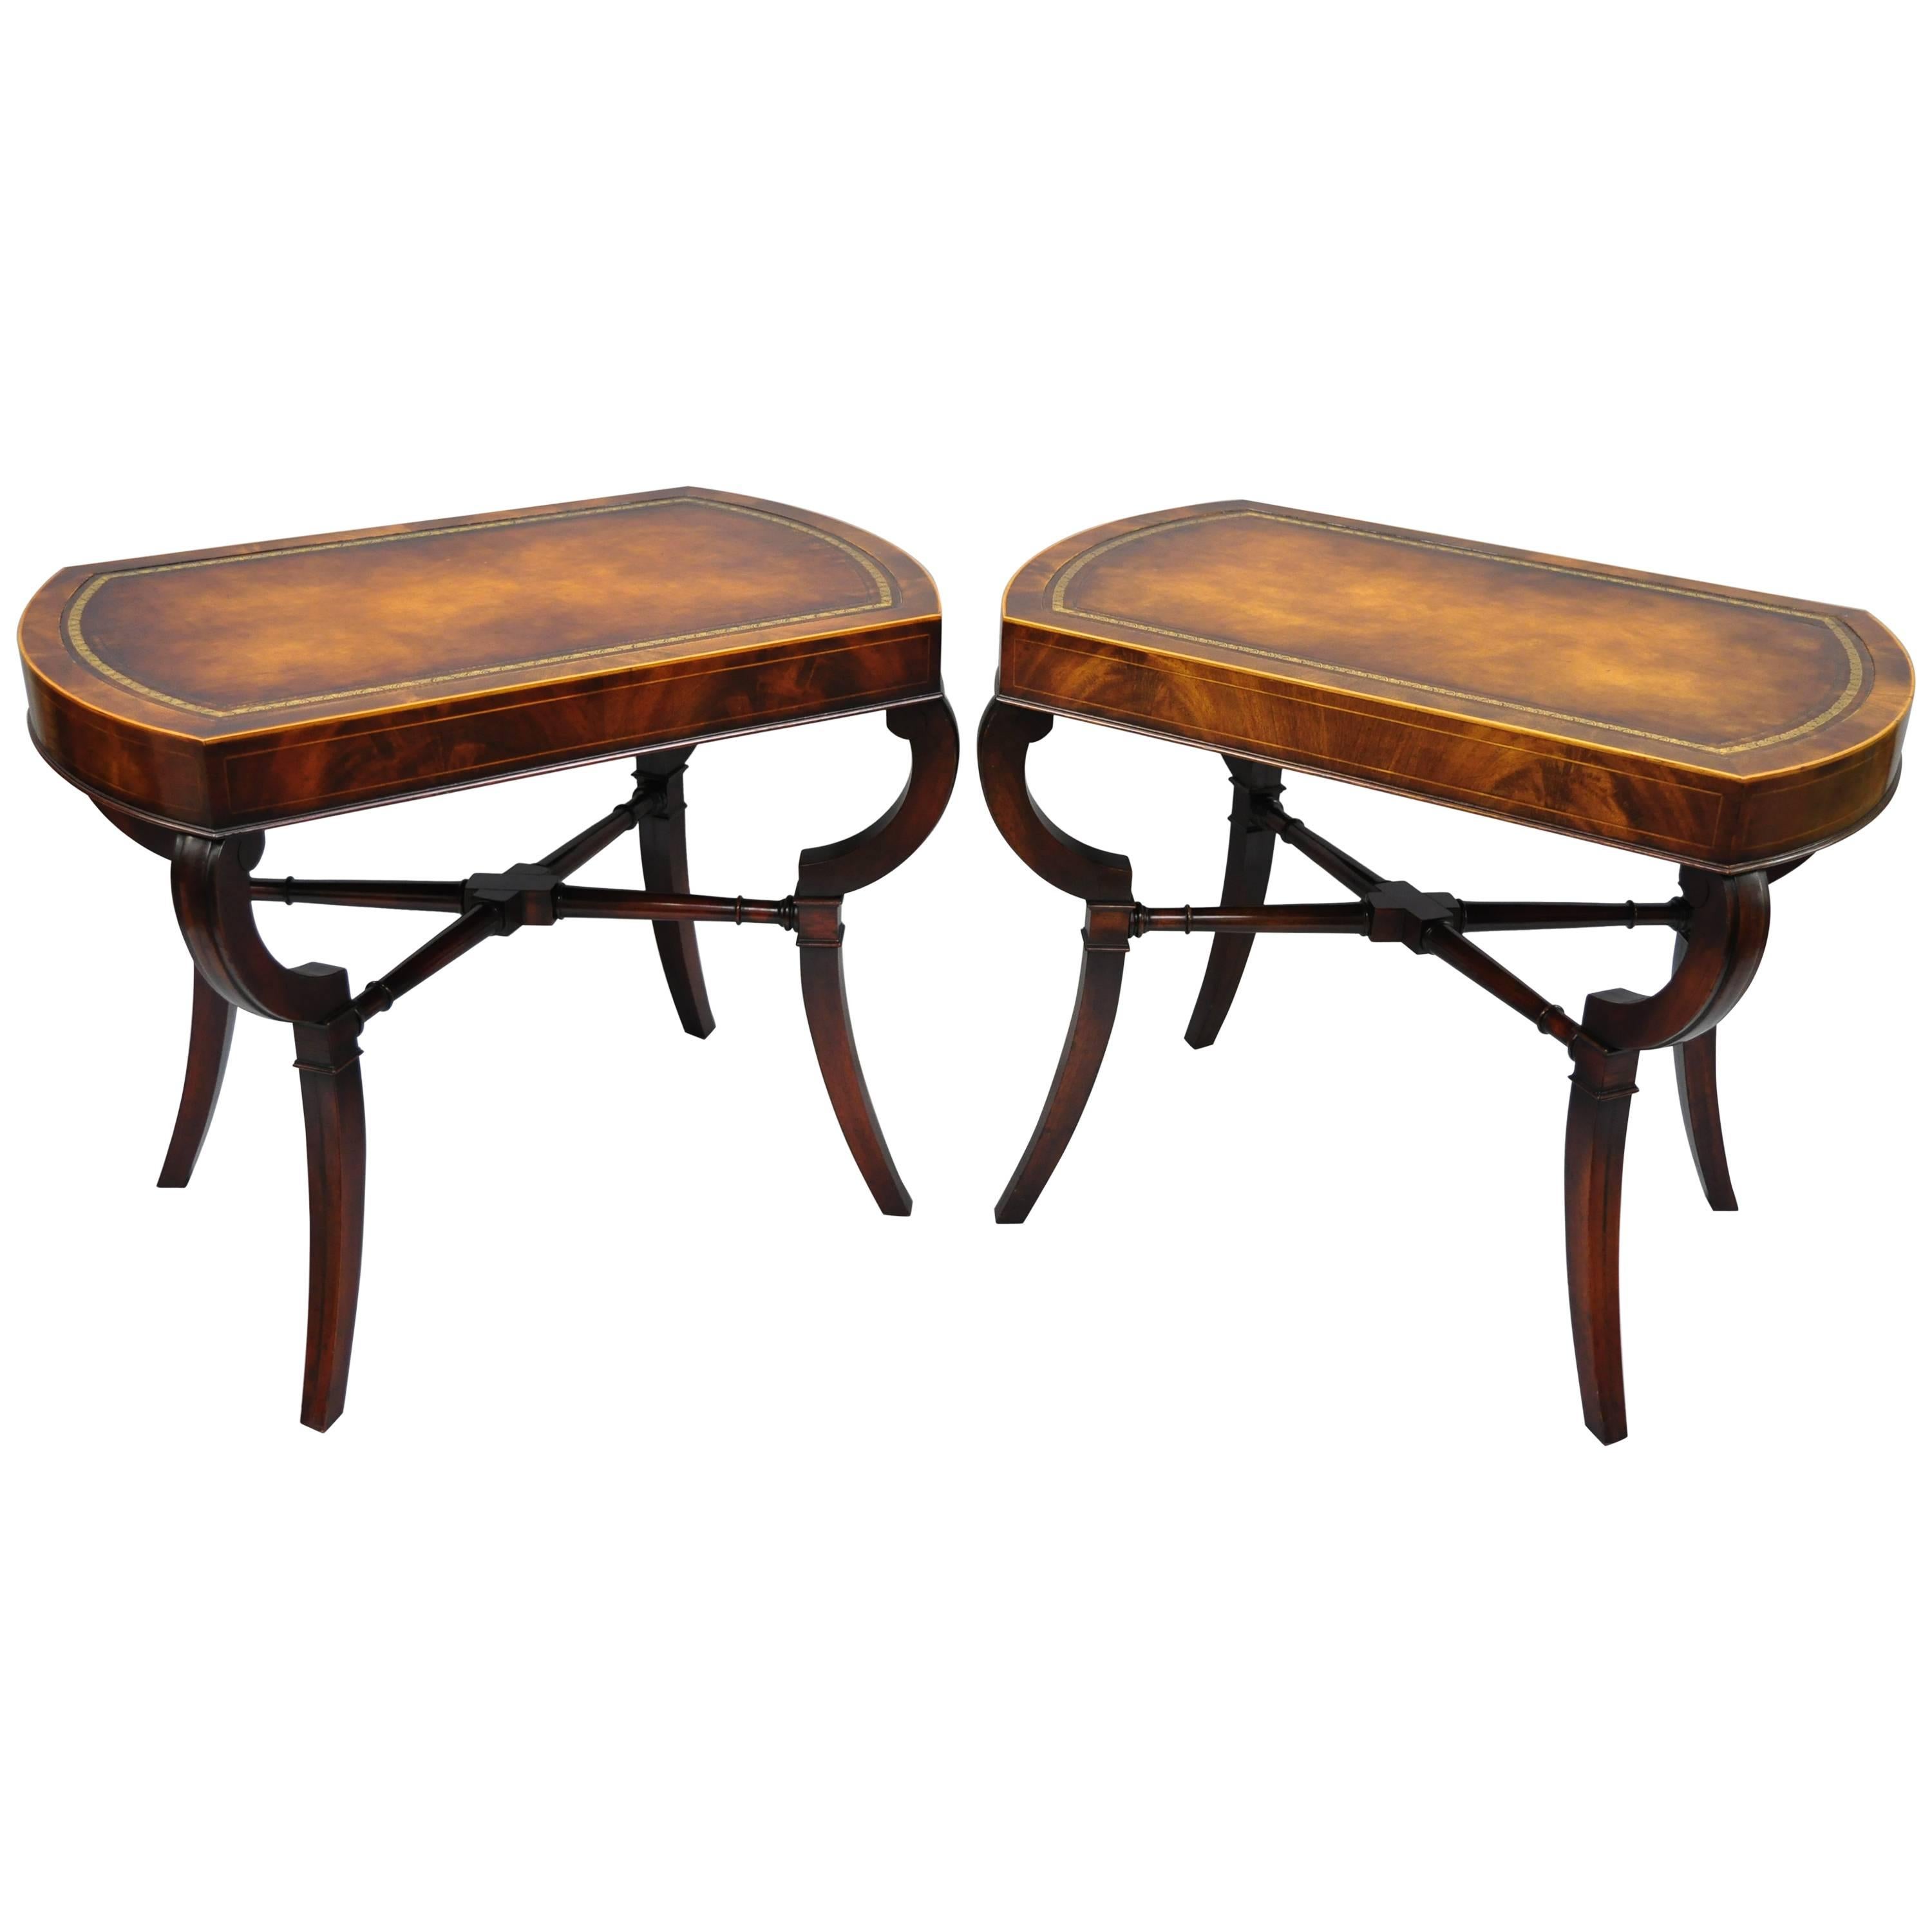 Pair of Flame Mahogany Leather Top English Regency Style Saber Leg End Tables